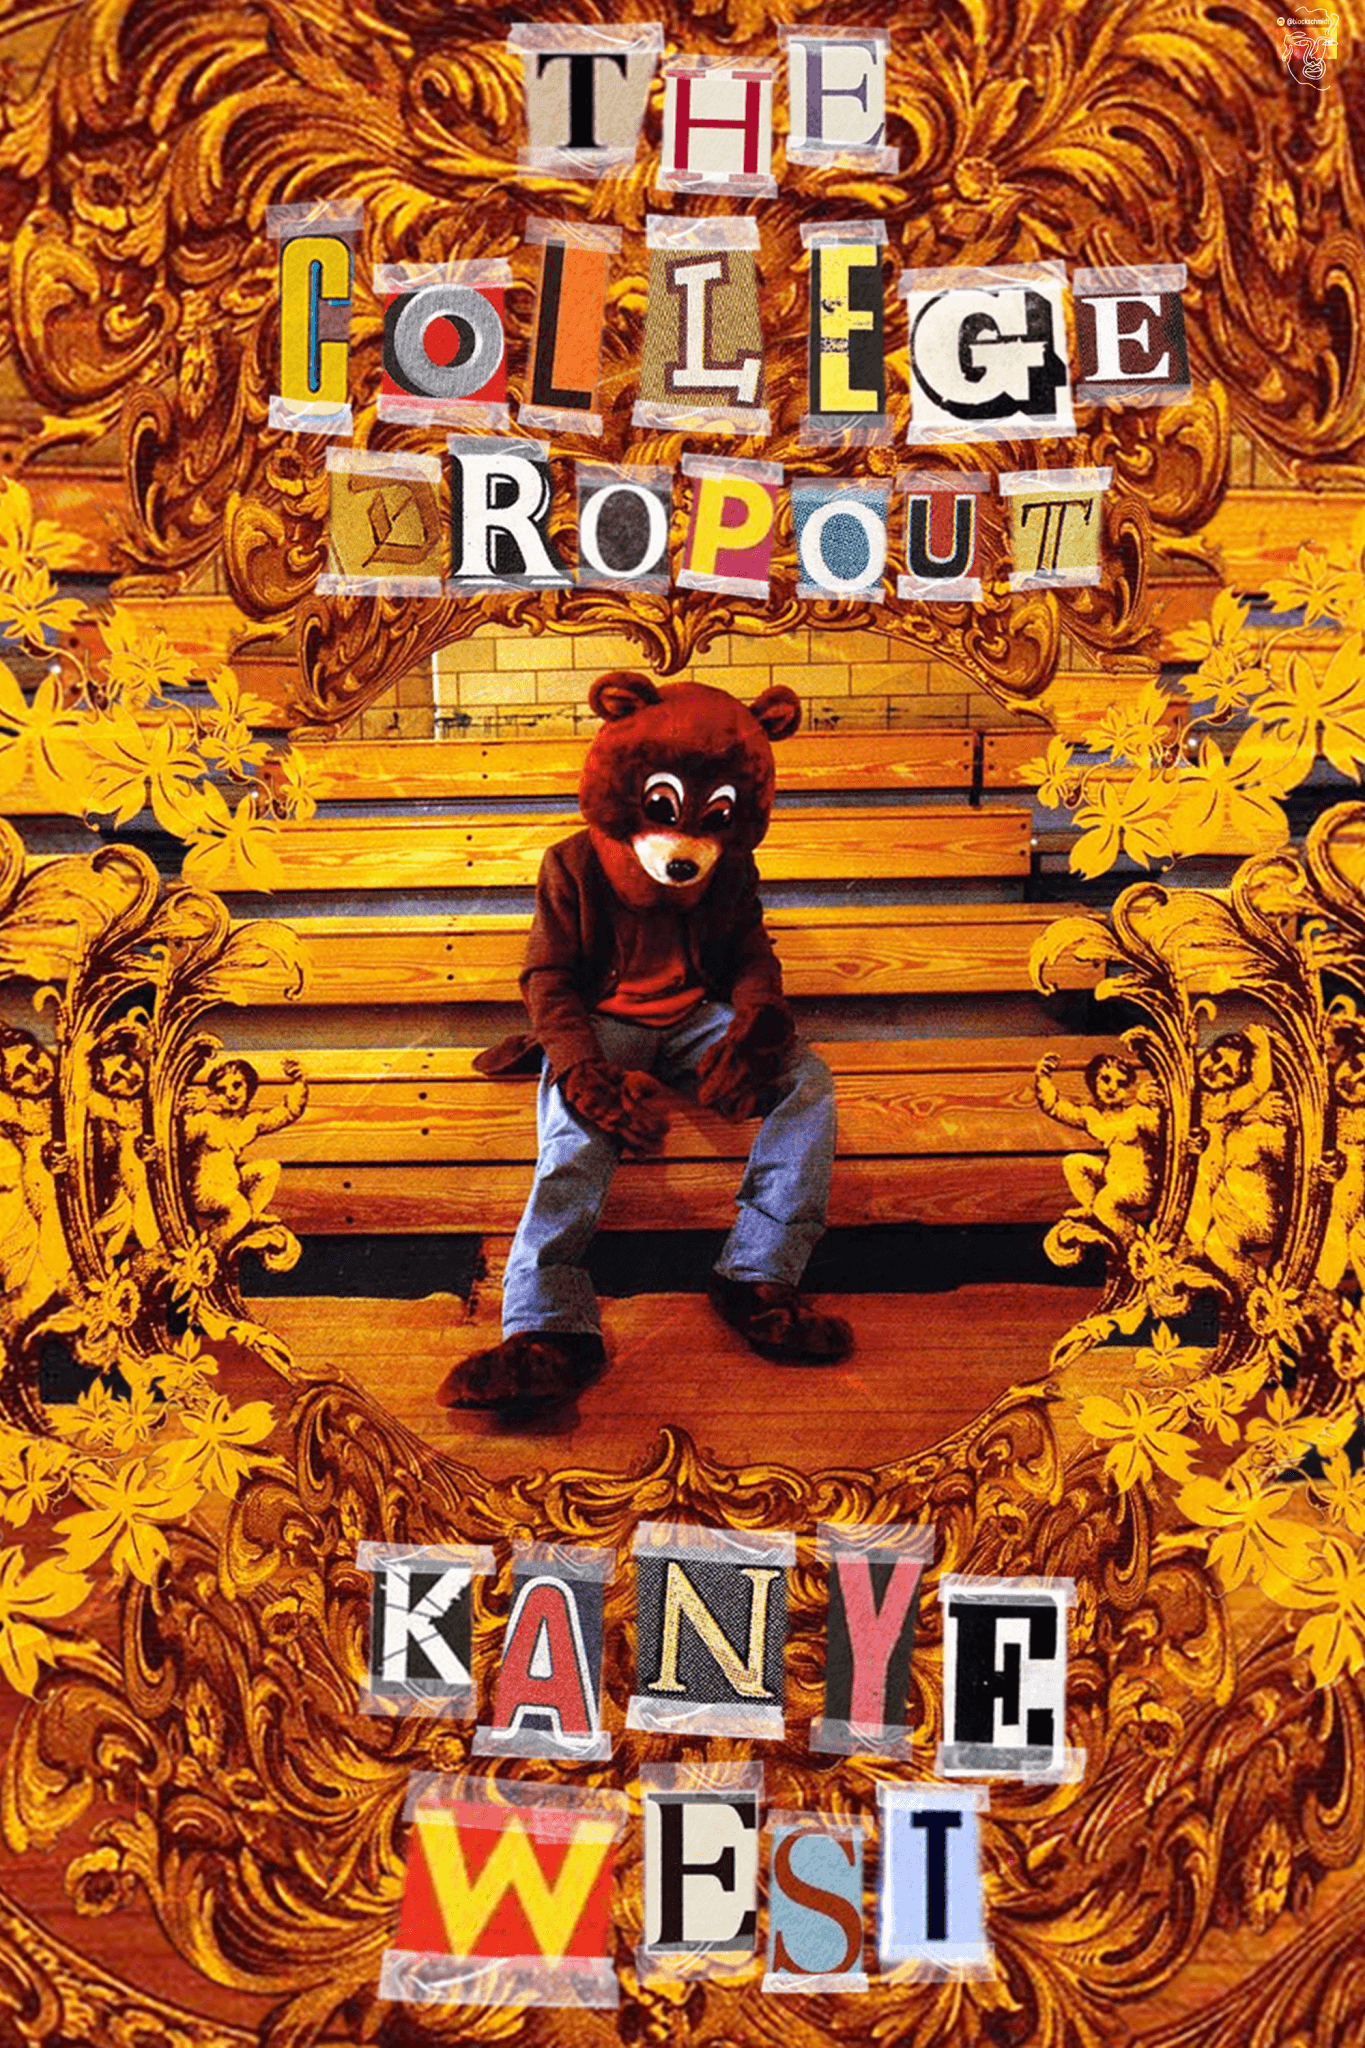 Kanye West x The College Dropout Poster